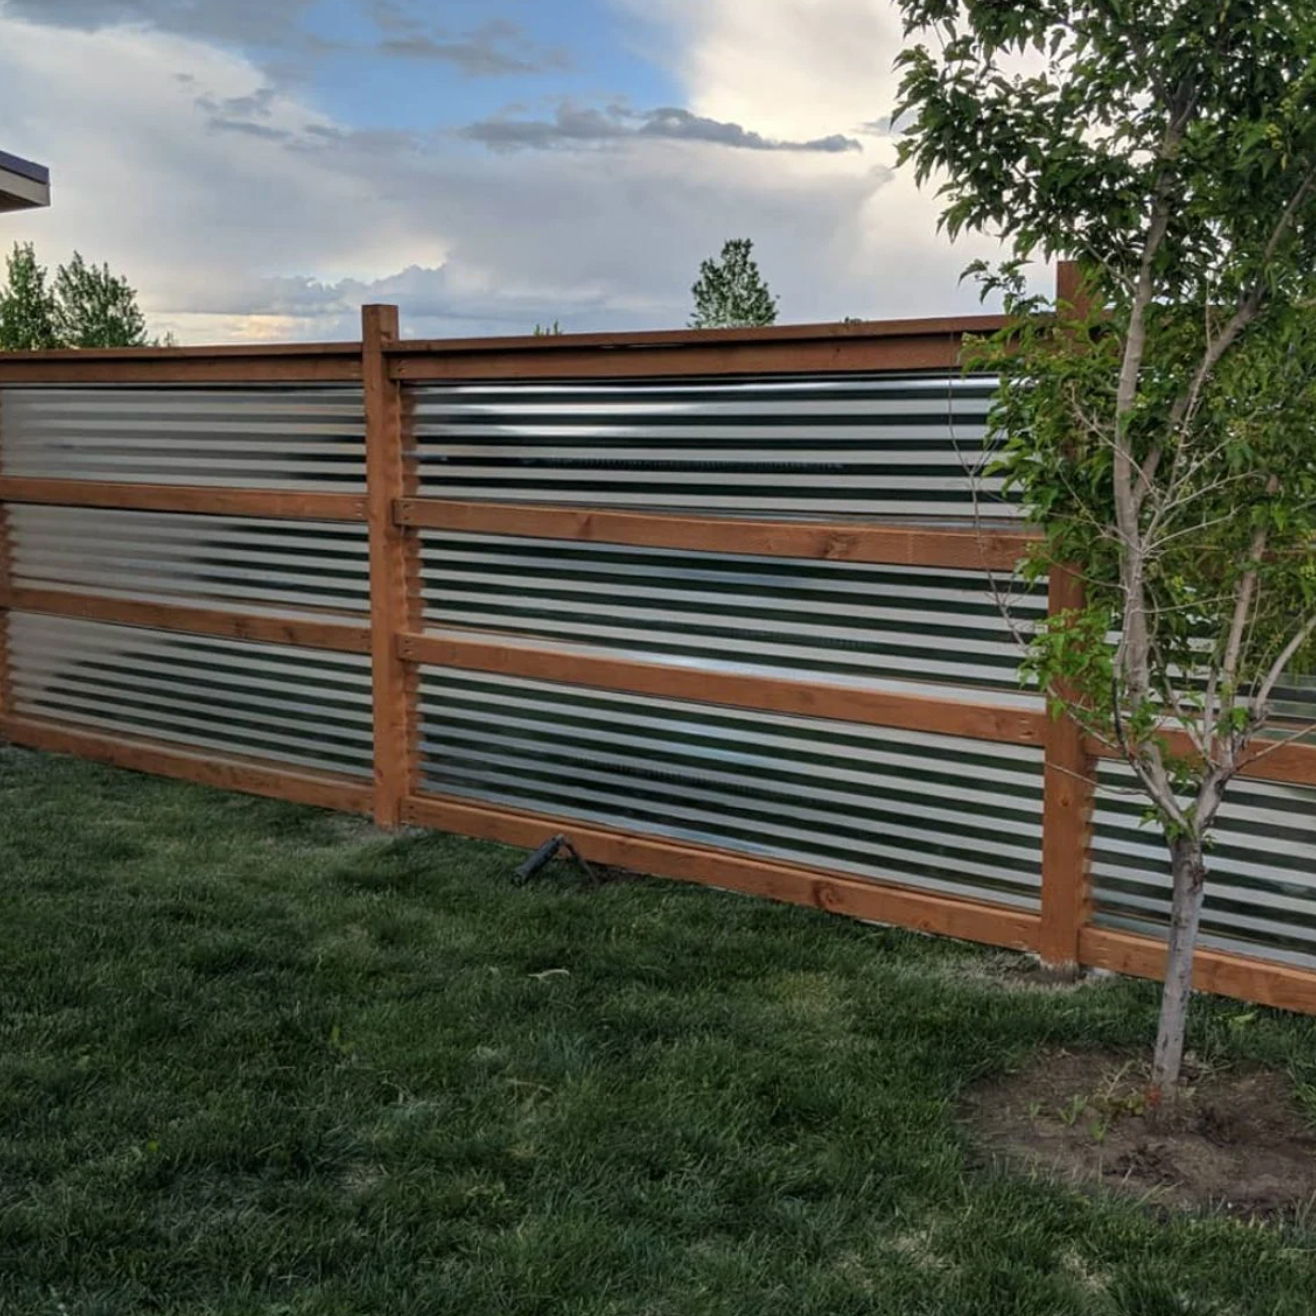 Corrugated metal privacy fence